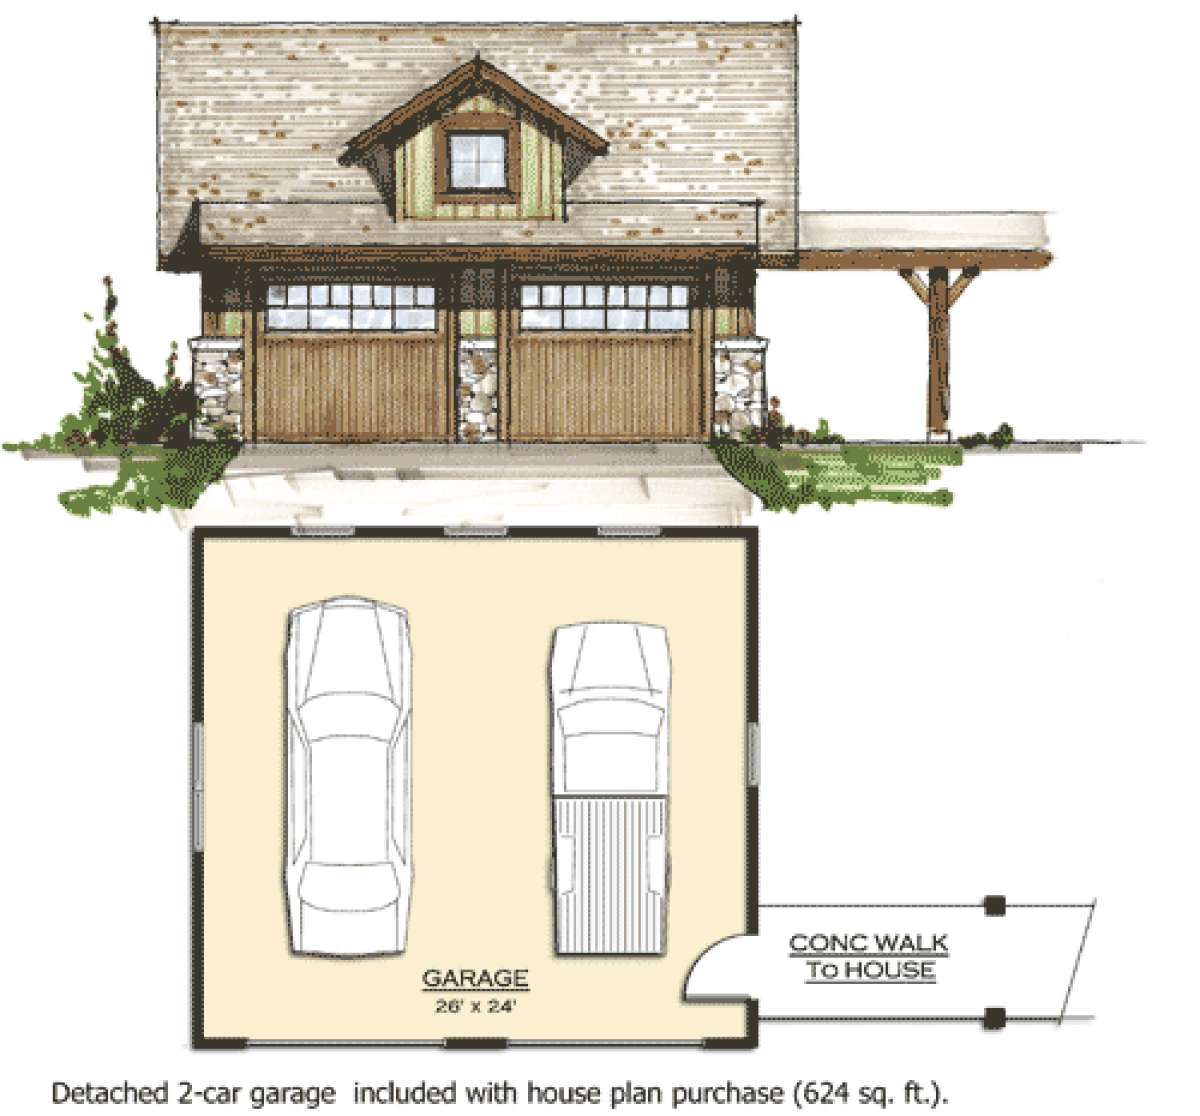 Garage for House Plan #8504-00037